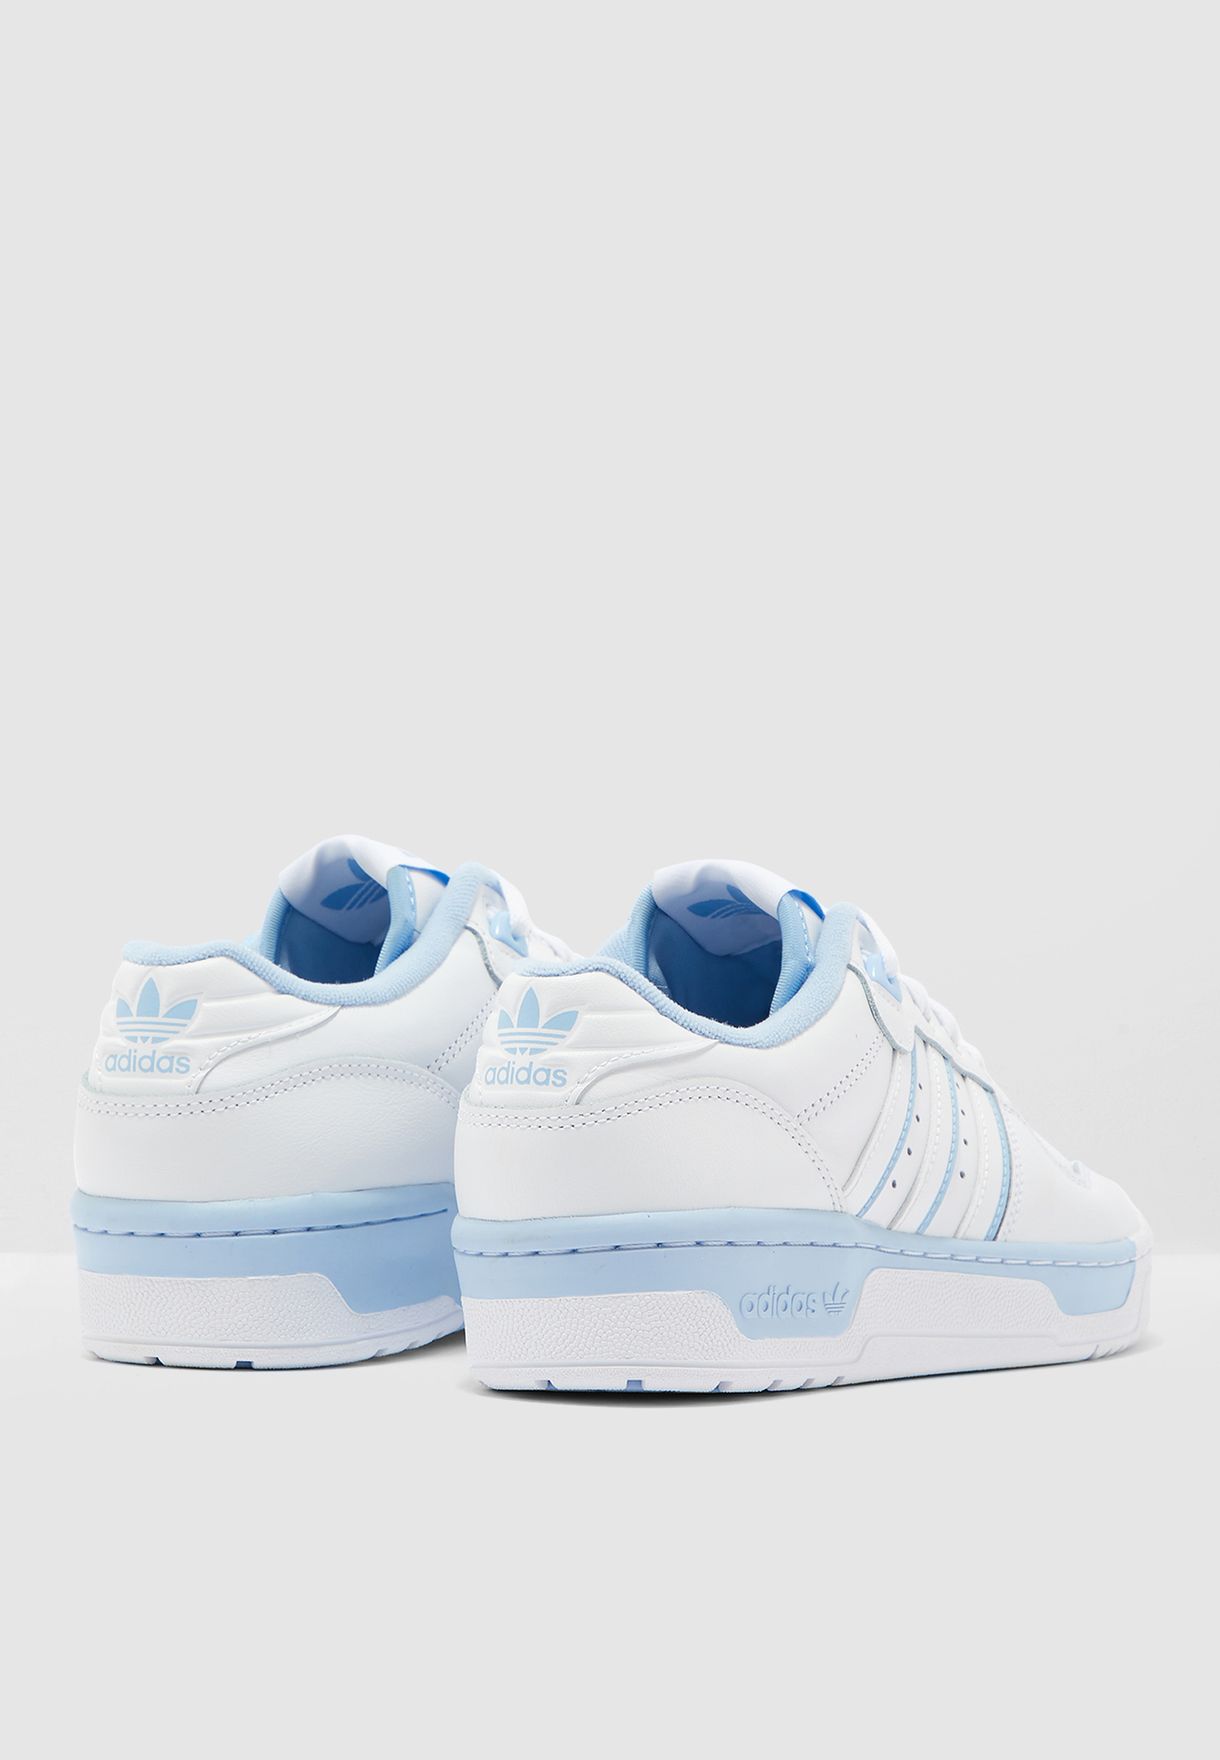 adidas originals rivalry low trainer in blue and pink